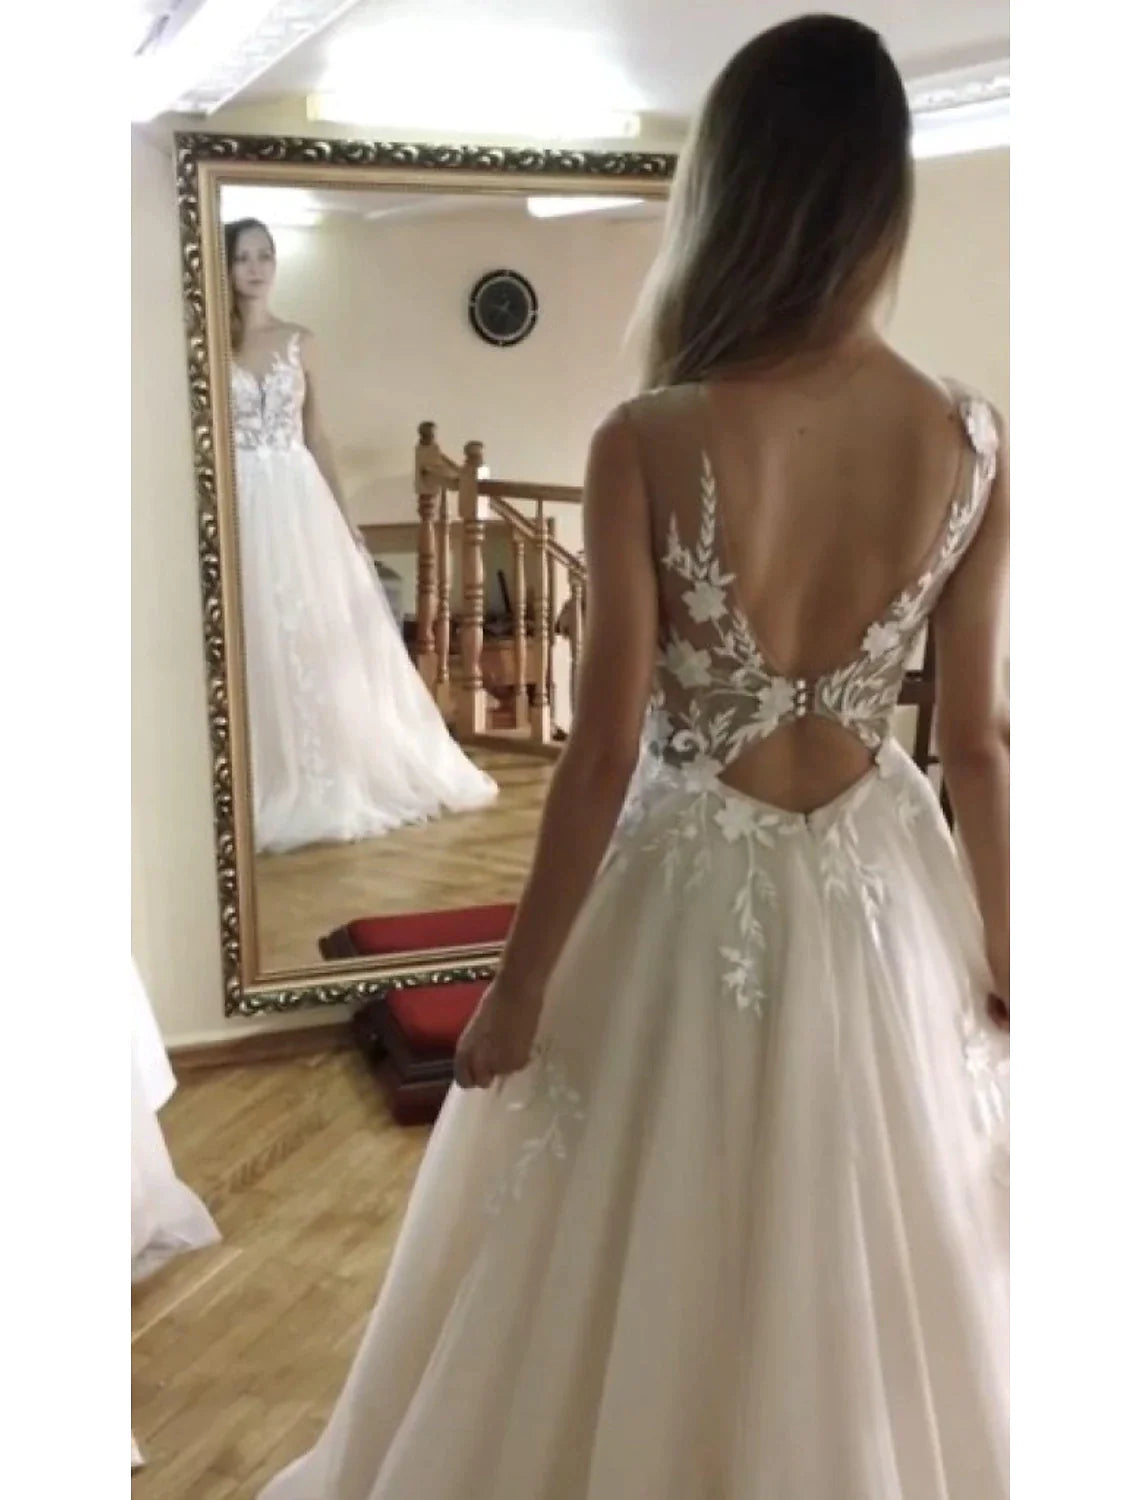 Beach Open Back Sexy Wedding Dresses A-Line V Neck Sleeveless Court Train Lace Bridal Gowns With Appliques Summer Fall Wedding Party